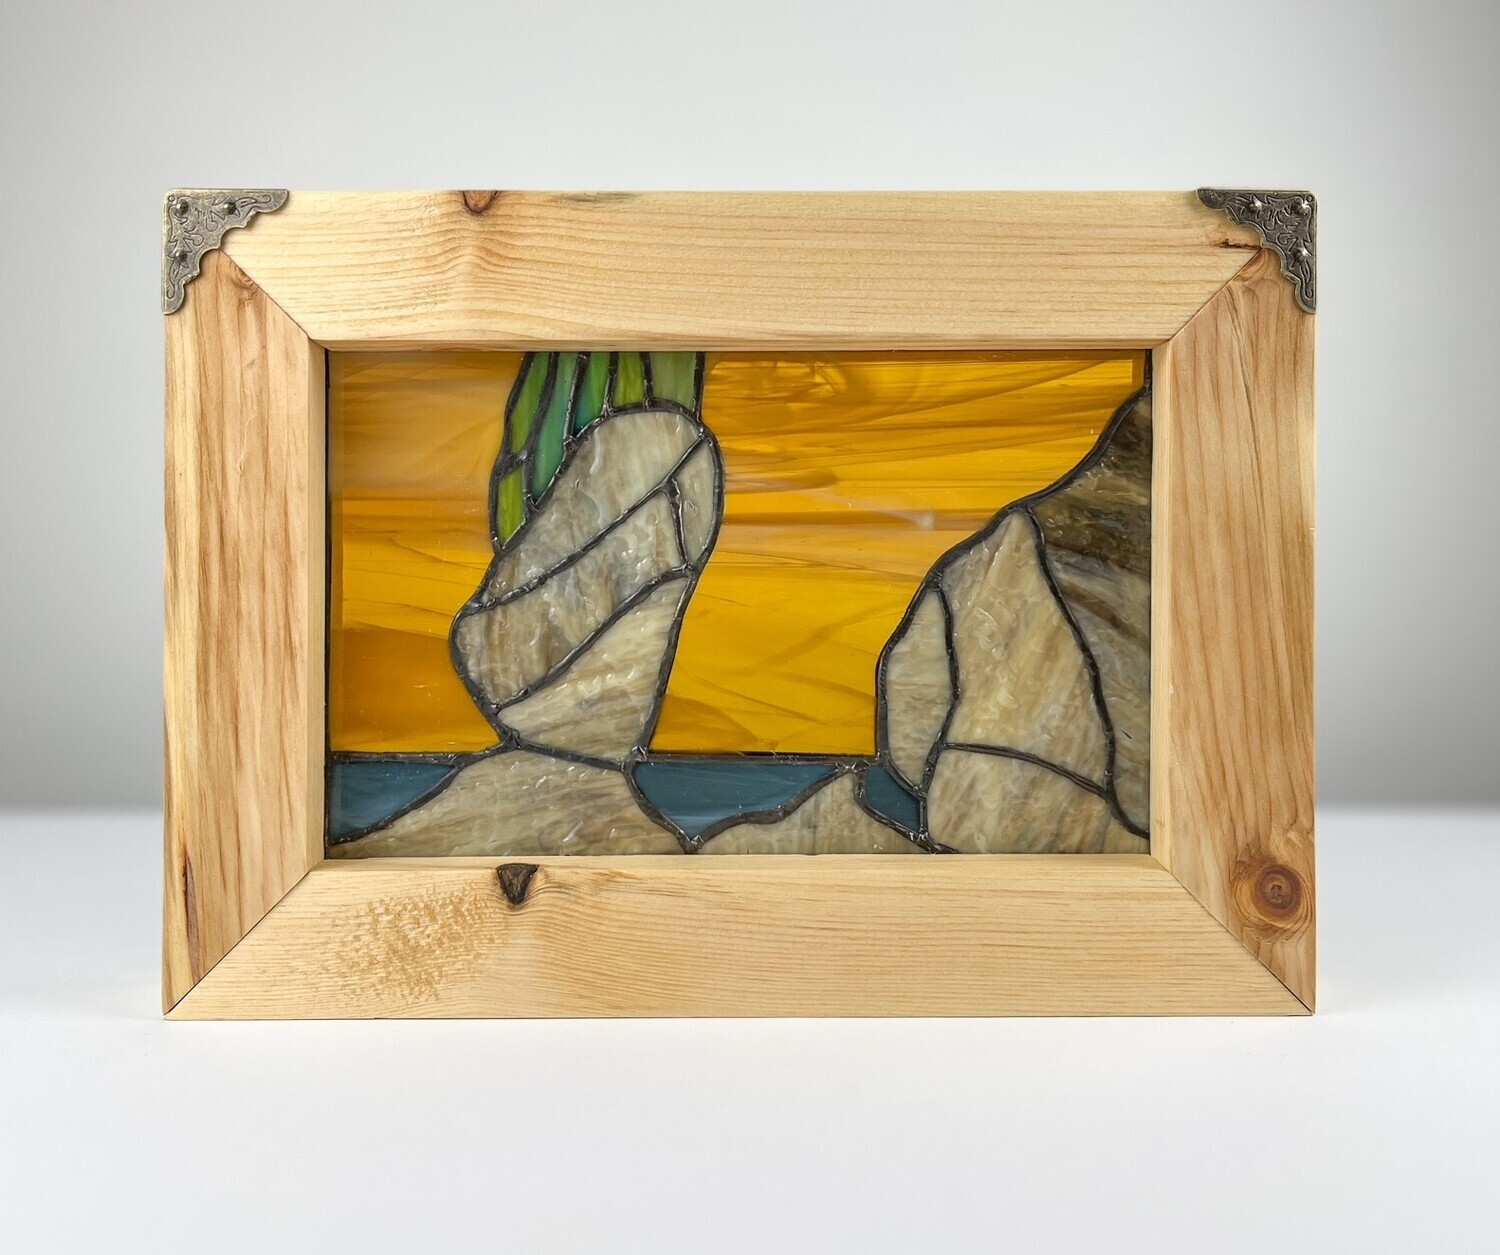 "Hopewell Rocks 4" 8x12" Framed Stained Glass